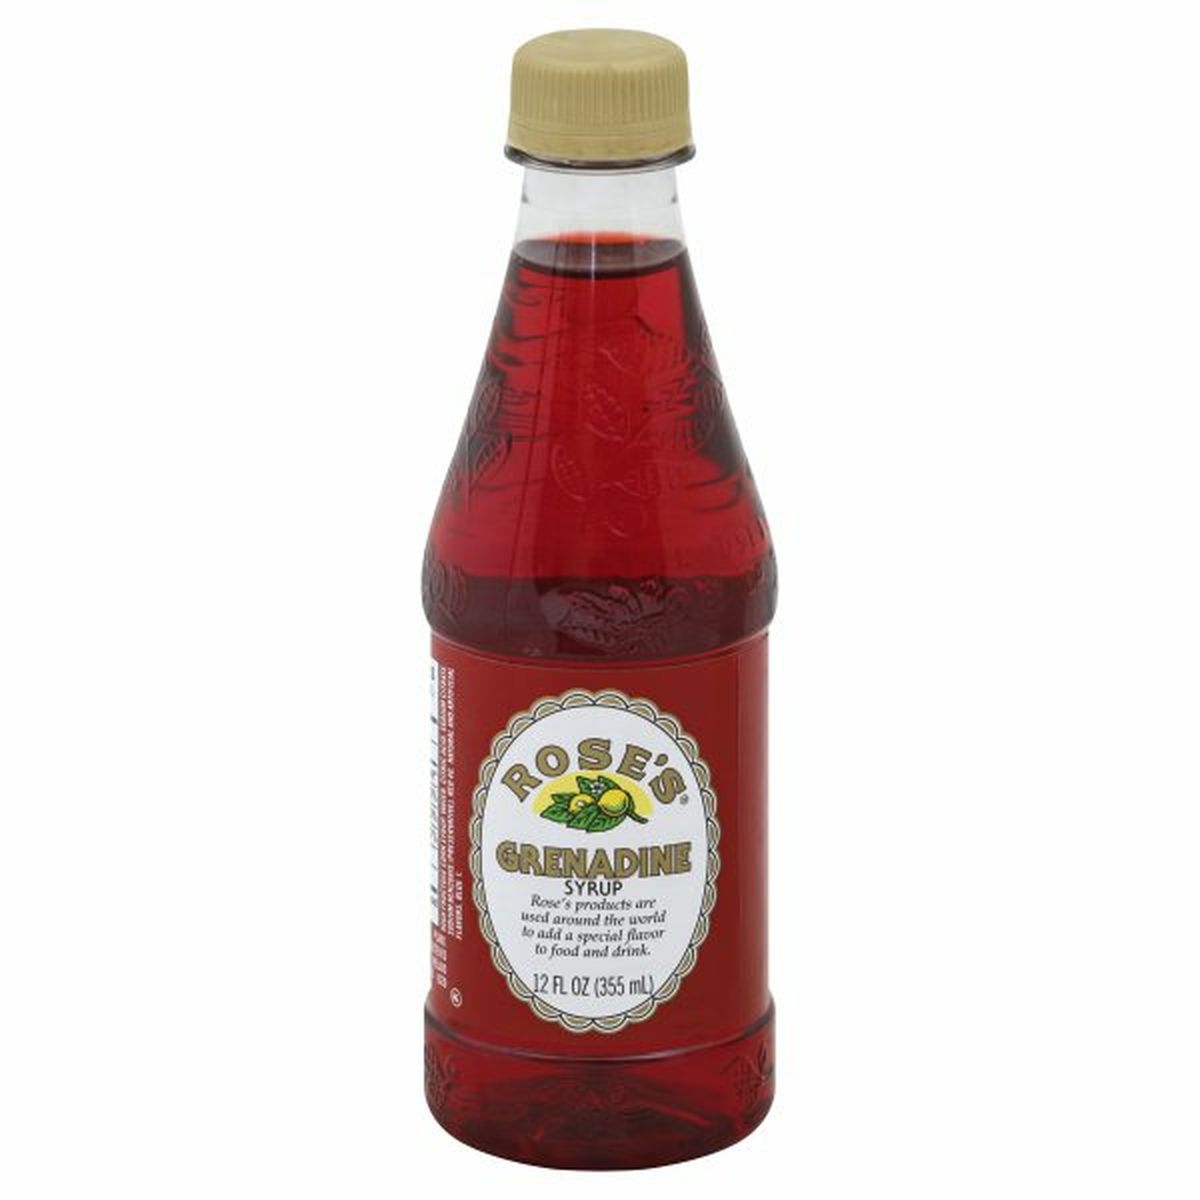 Calories in Distributed Consumables Syrup, Grenadine